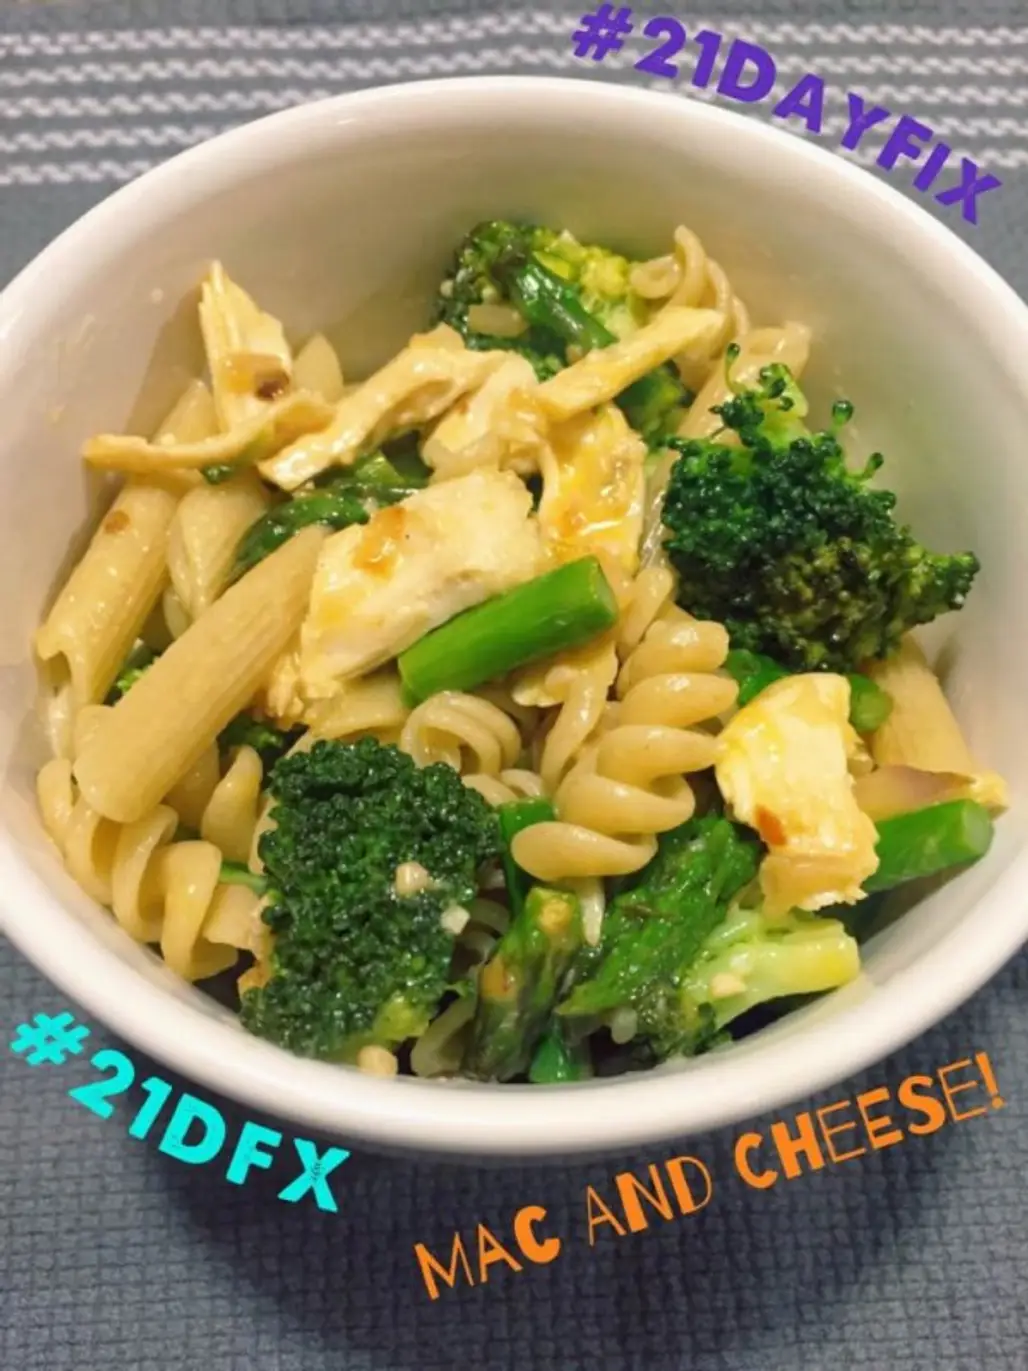 Chicken Mac and Cheese with Asparagus and Broccoli